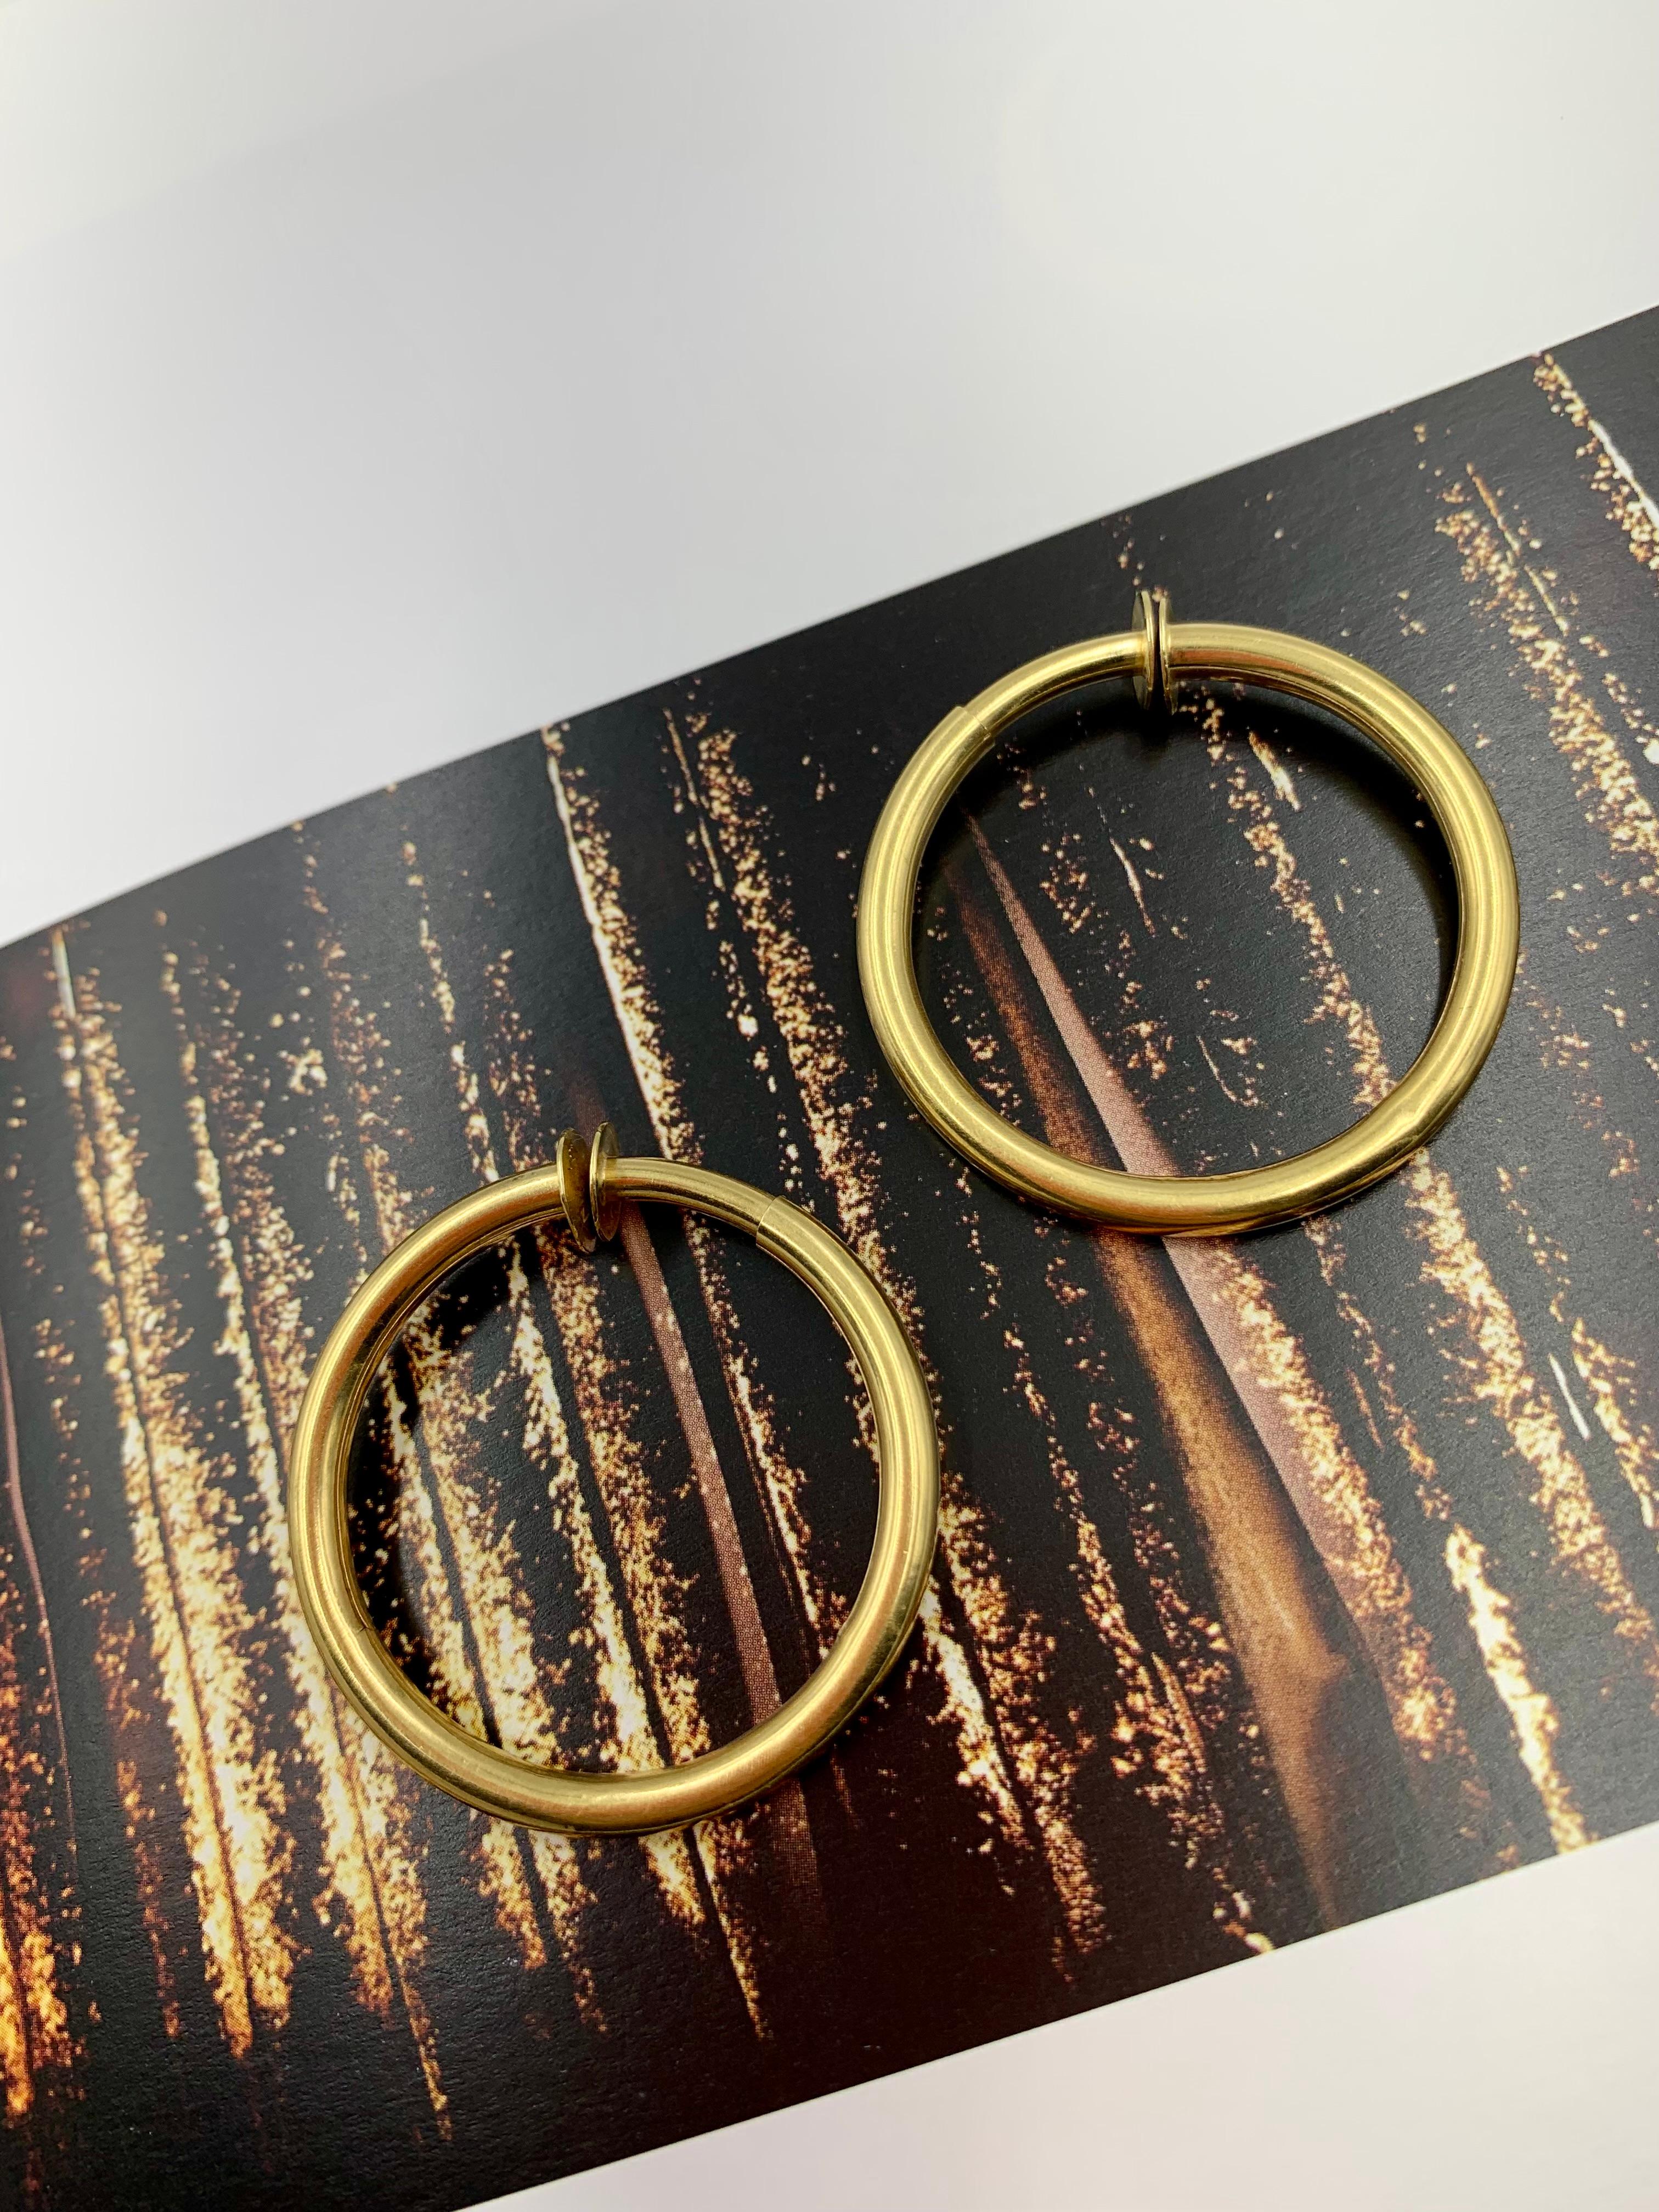 Large beautiful classic signed 18K yellow gold hoop earrings
20th Century
Diameter: 1.32 inches
Weight: 7.8 grams
Marks: 750 for 18K gold, signed with maker's mark in greek
High quality consistent with Zolotas or Lalaounis.
Condition: Very